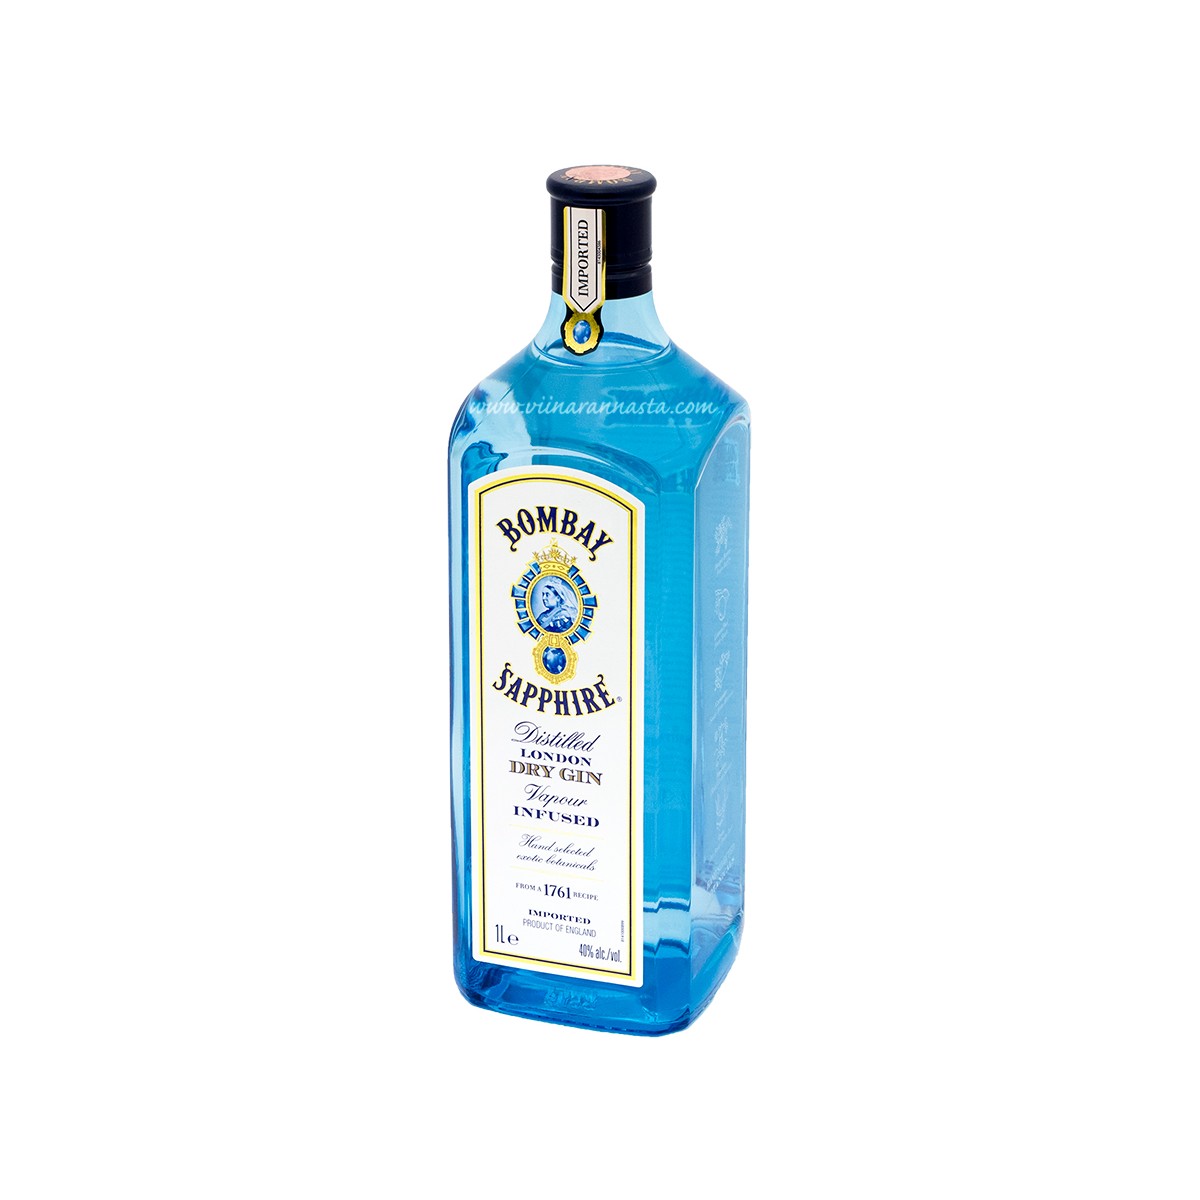 Dry Gin 40% Bombay 100cl Sapphire